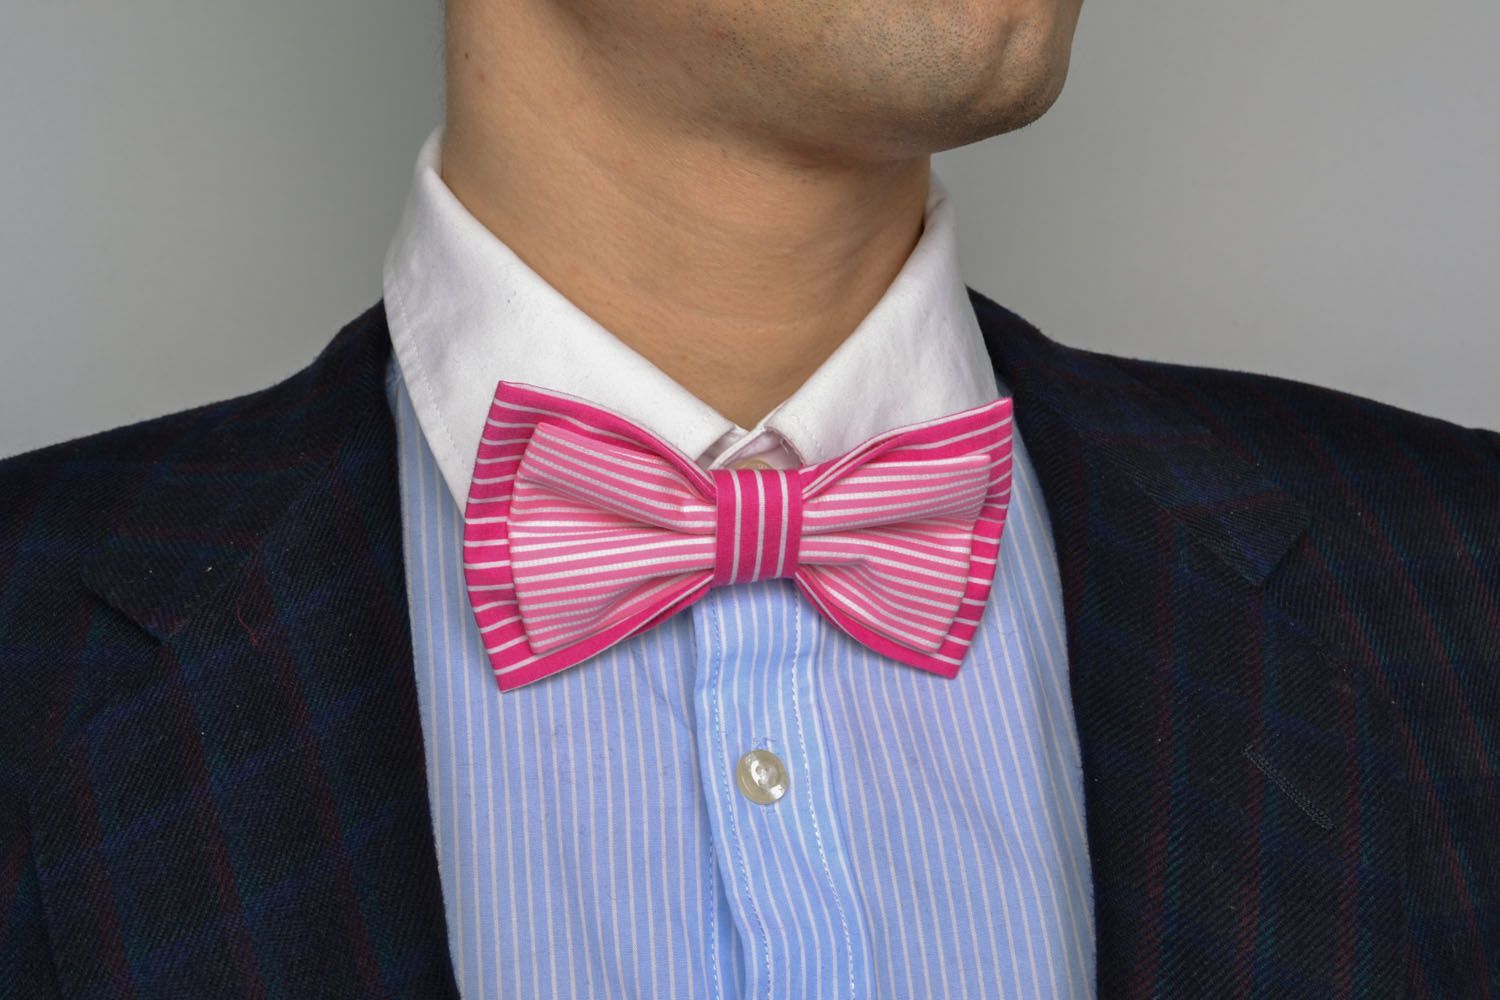 Bright-pink bow tie photo 5